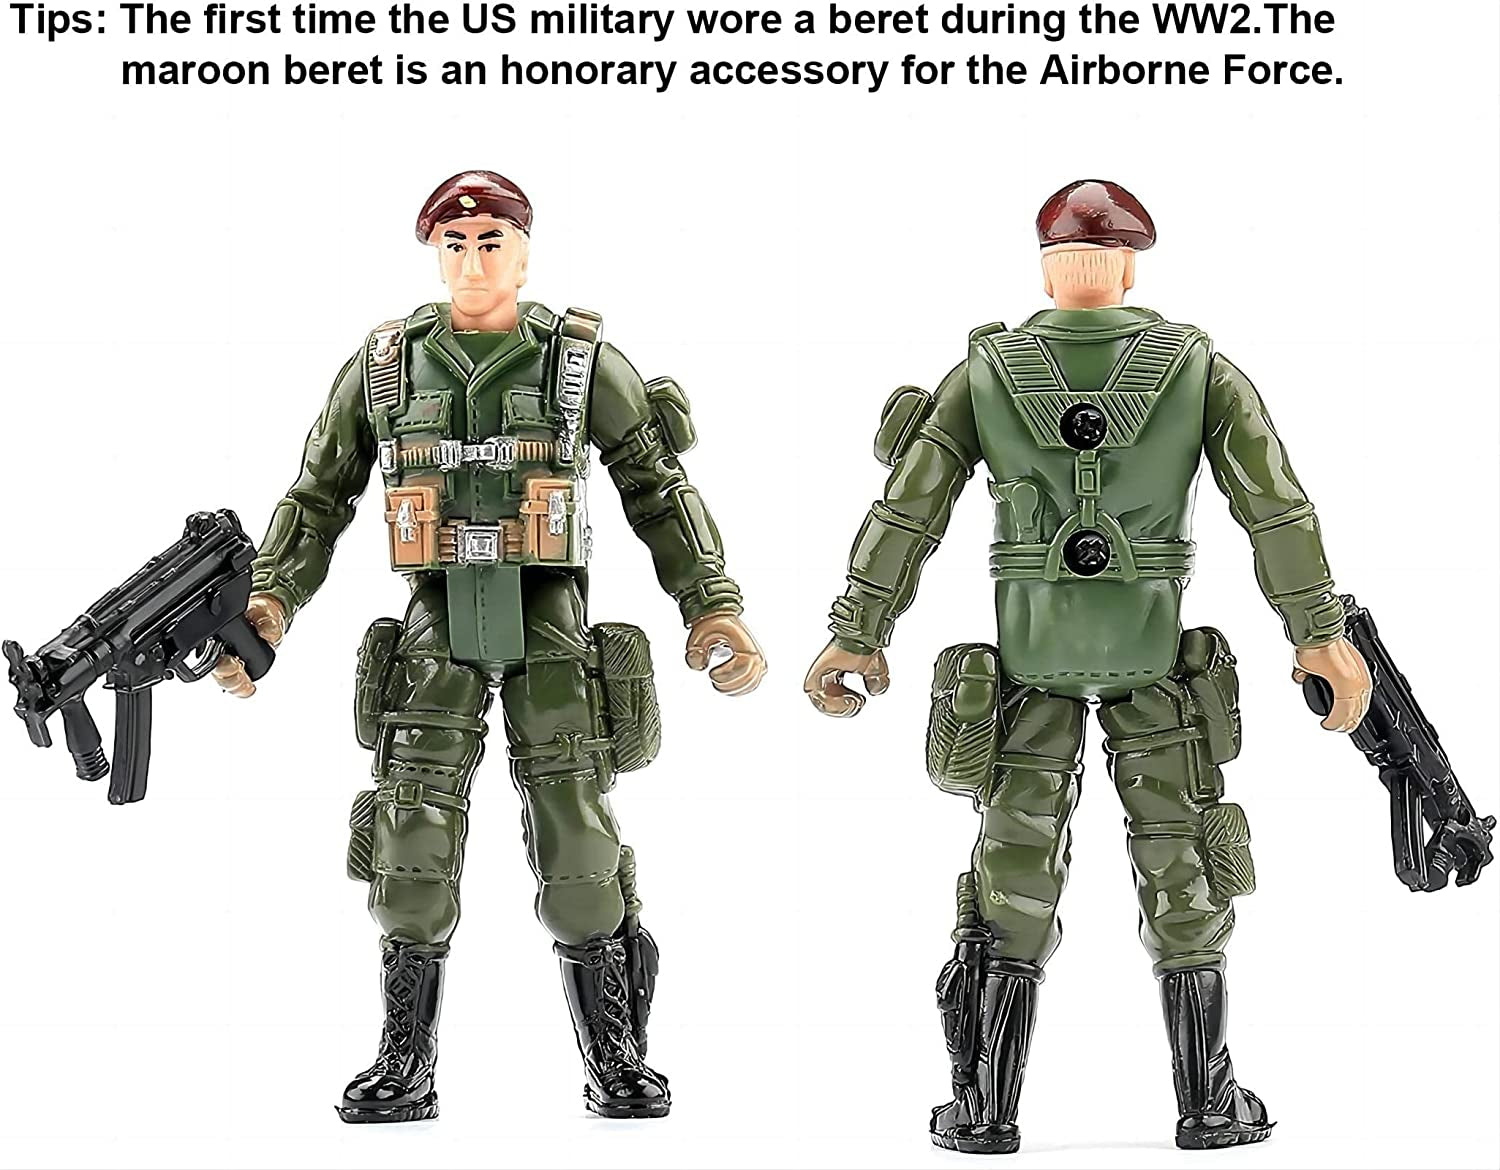 12-Piece US Army Men and SWAT Team Action Figures Playset with Military Weapons Accessories